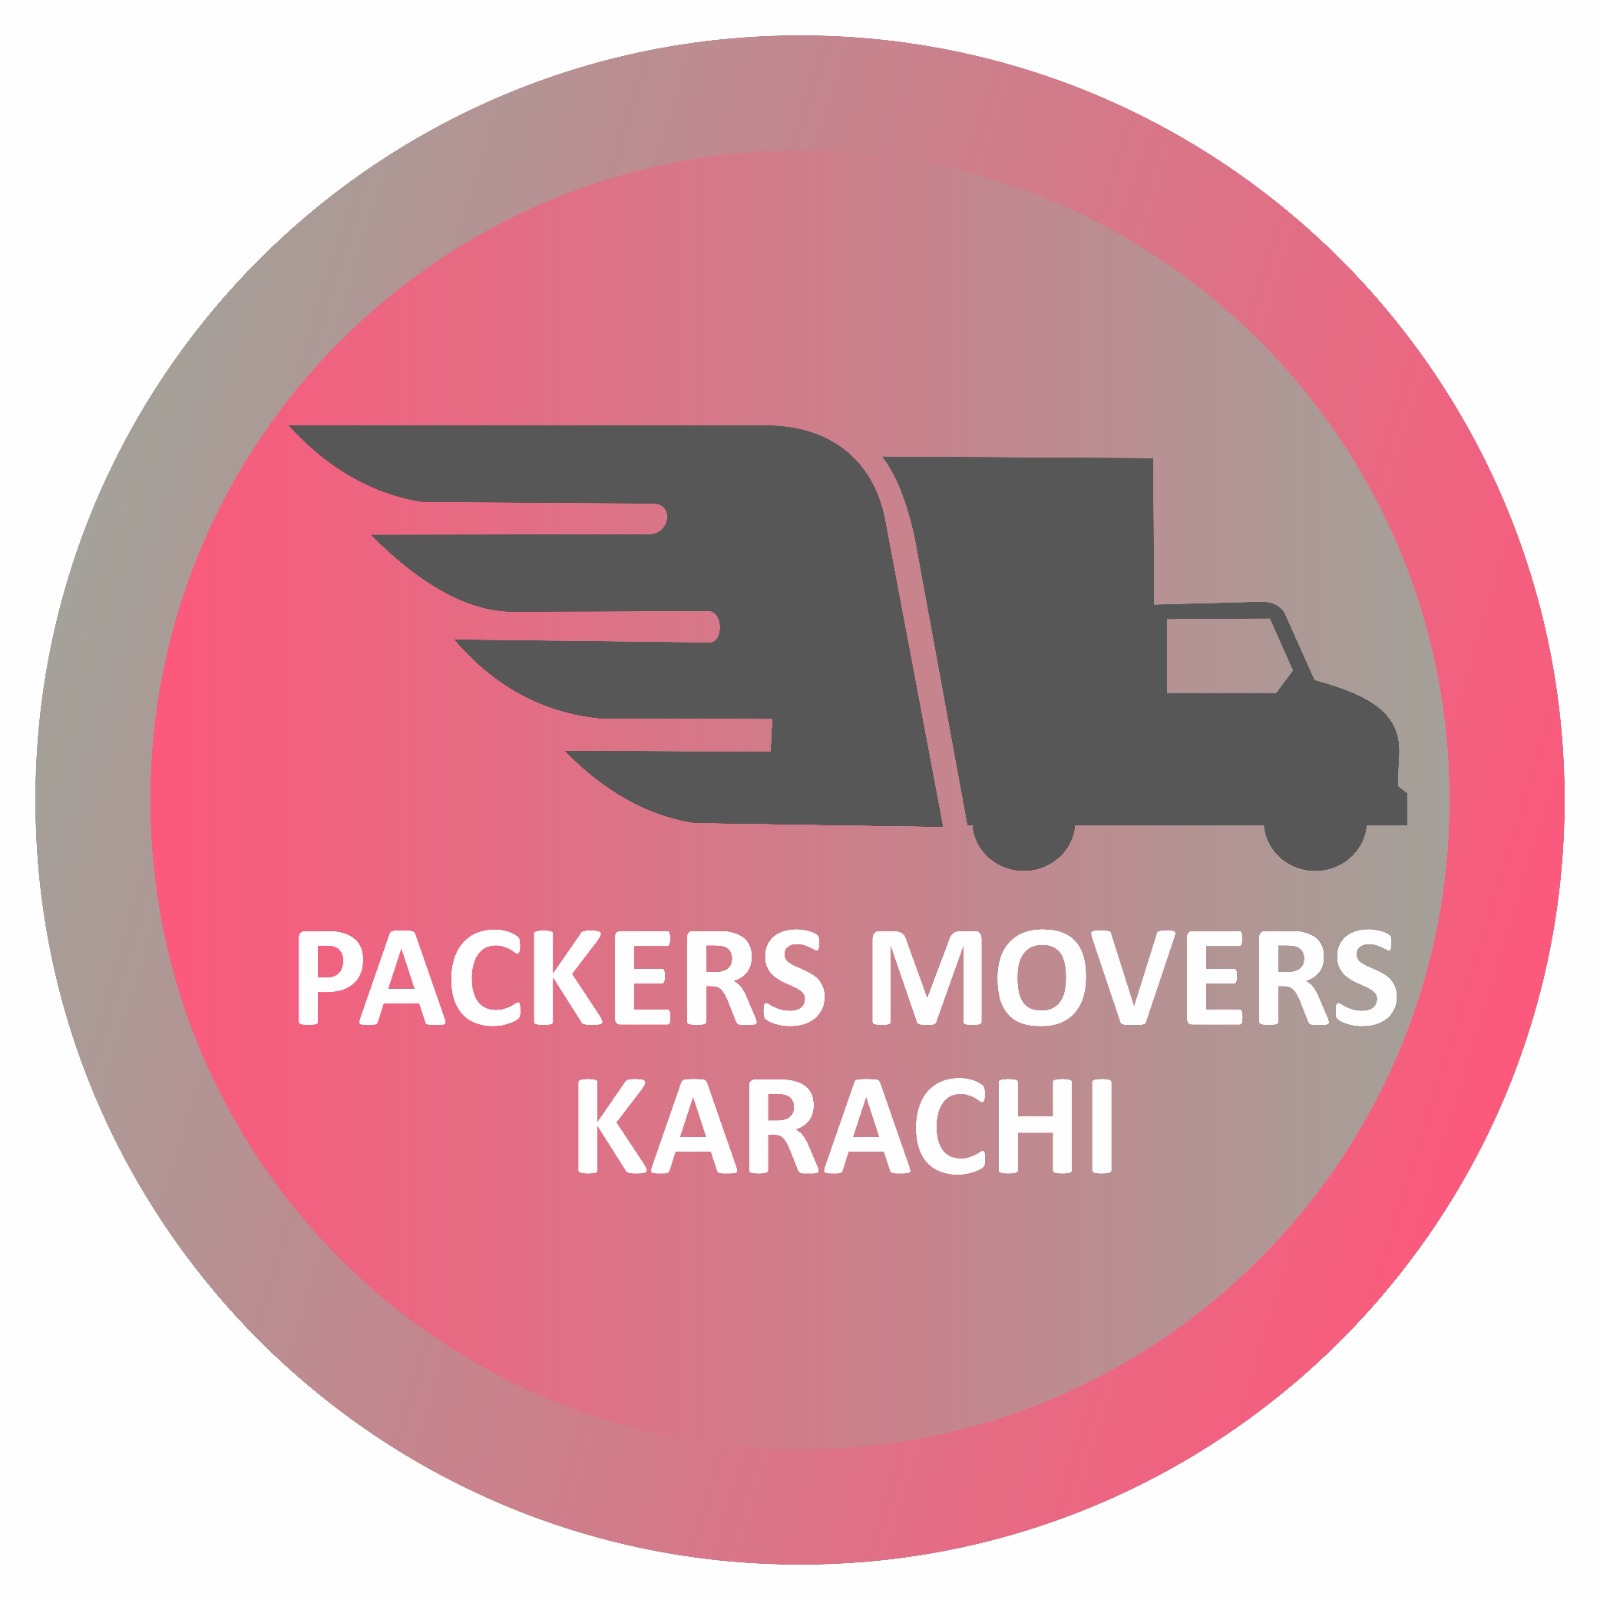 Packers and Movers Logo